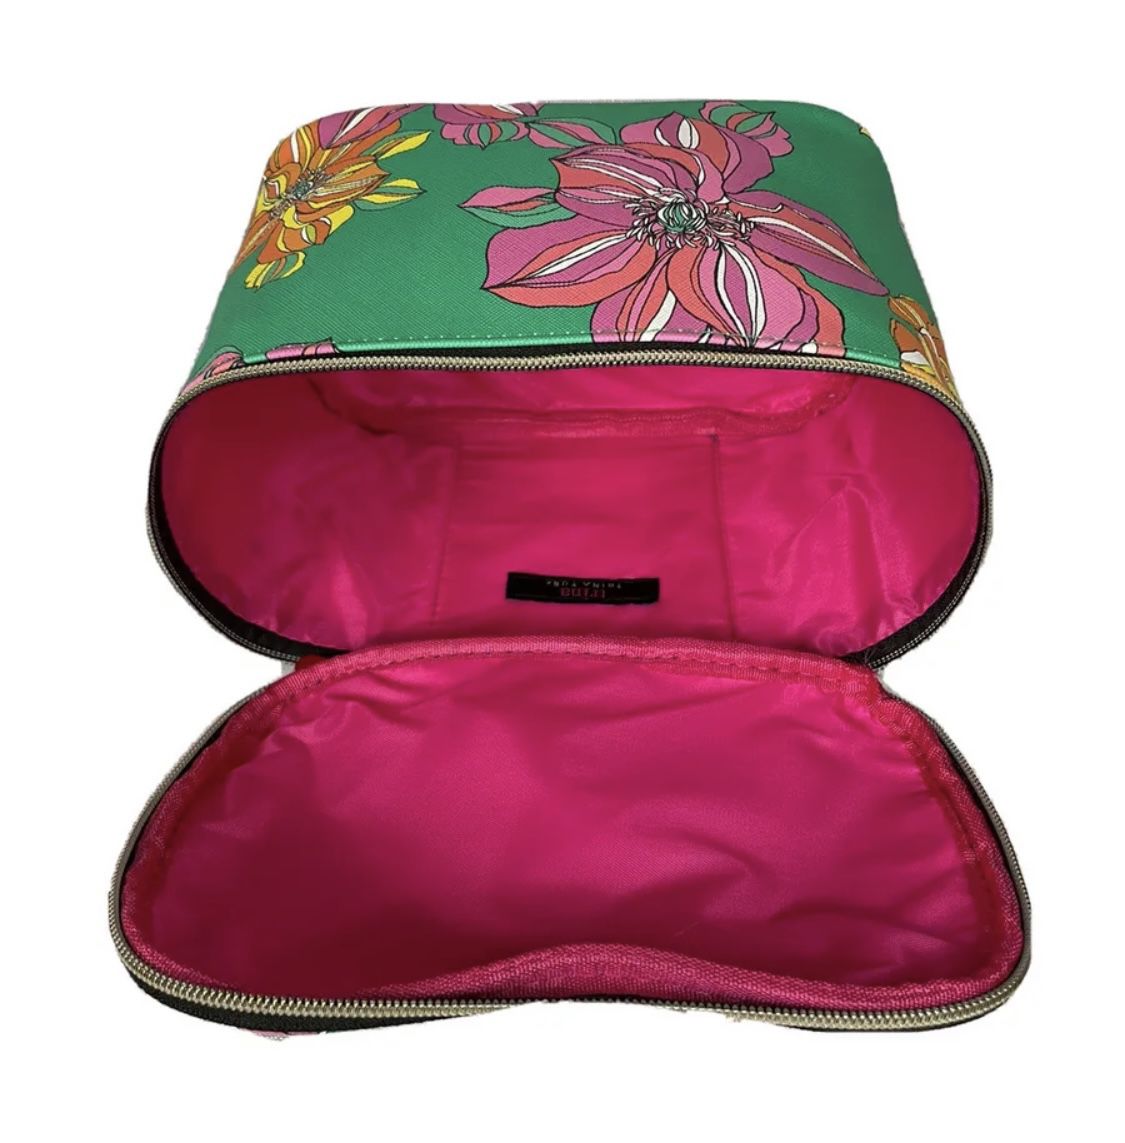 TRINA TURK Makeup Bag Cosmetic Travel Case for Sale in Brooklyn